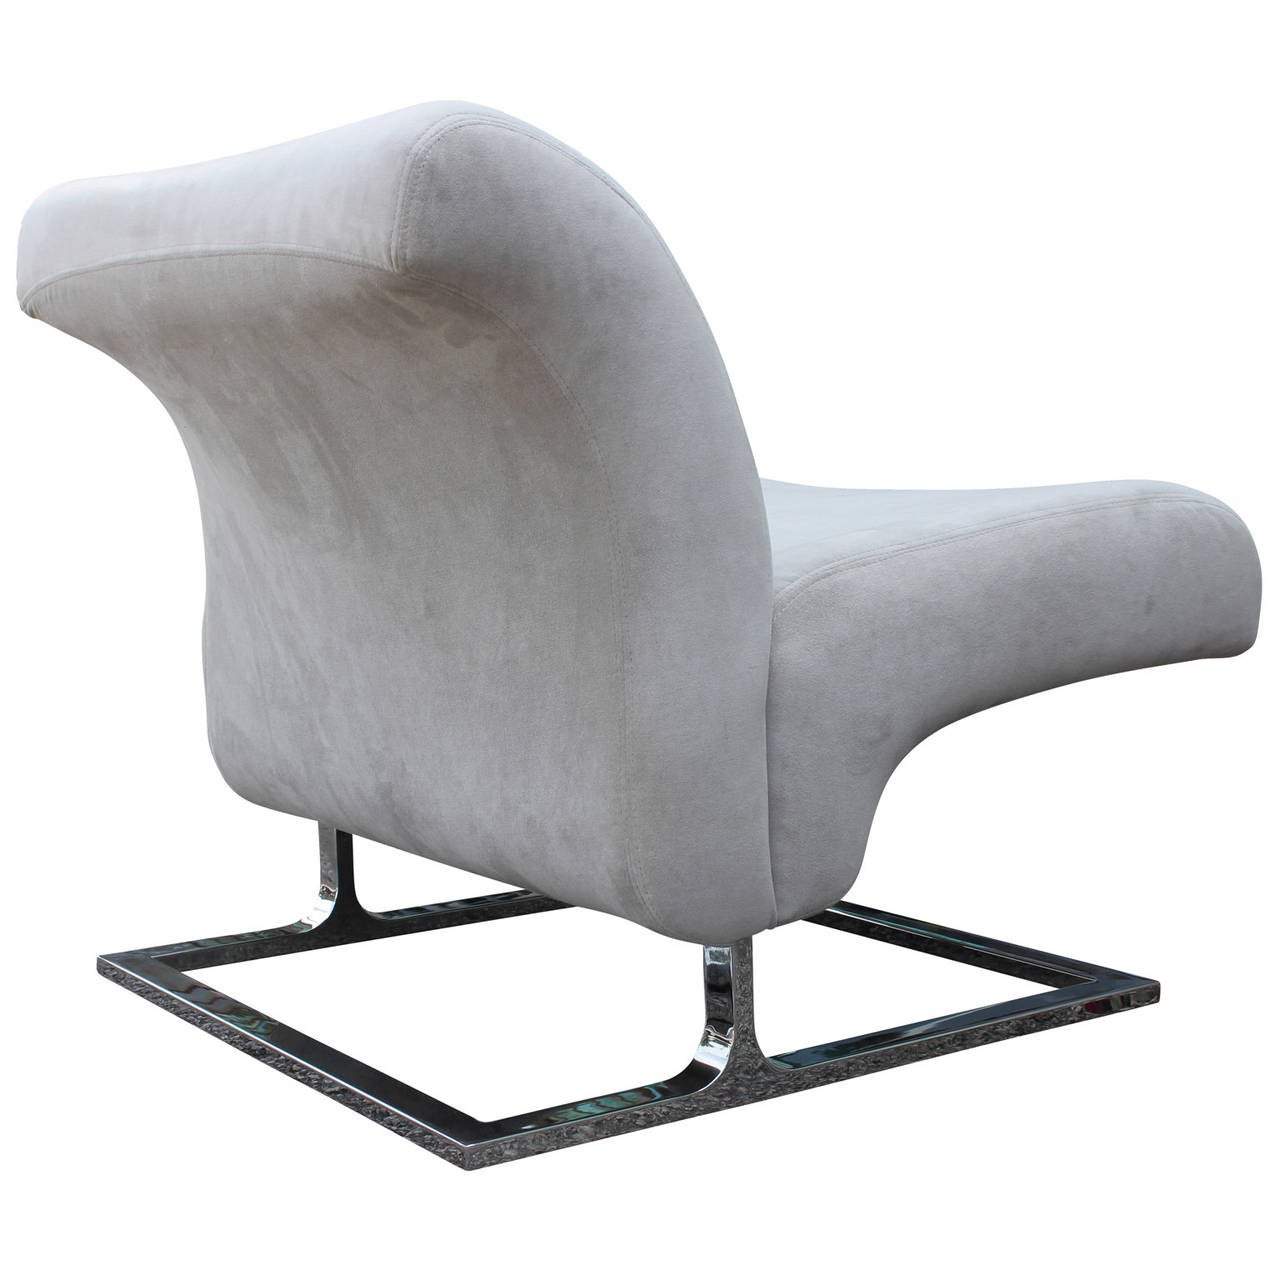 Italian Elegant Chrome and Grey Suede Cantilevered Lounge Chairs Saporiti Style